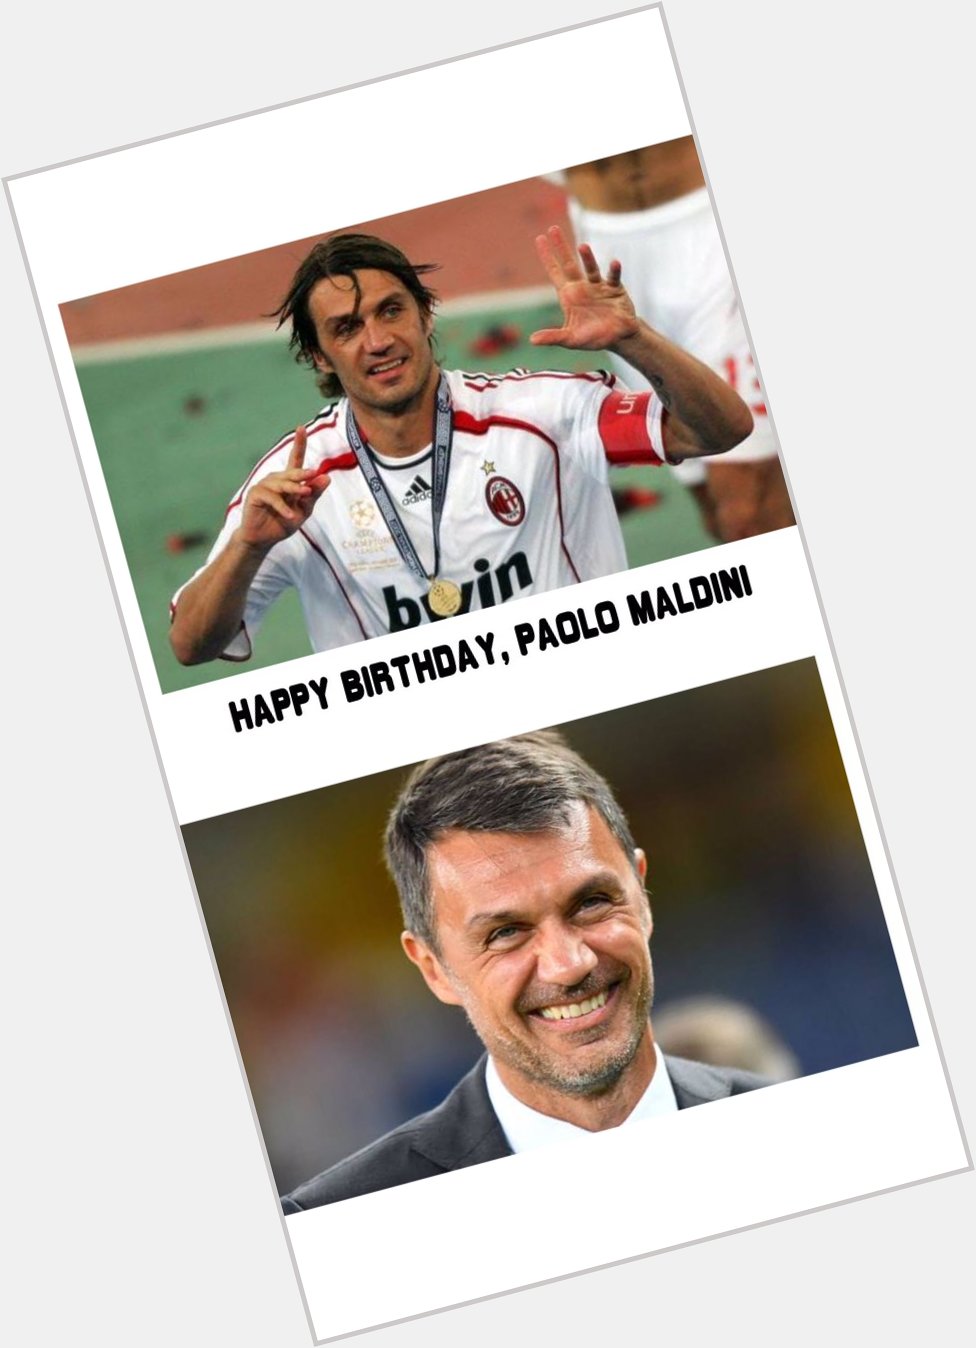 We celebrate one of the greatest defenders of all-time! Happy 52nd birthday to Paolo Maldini! 